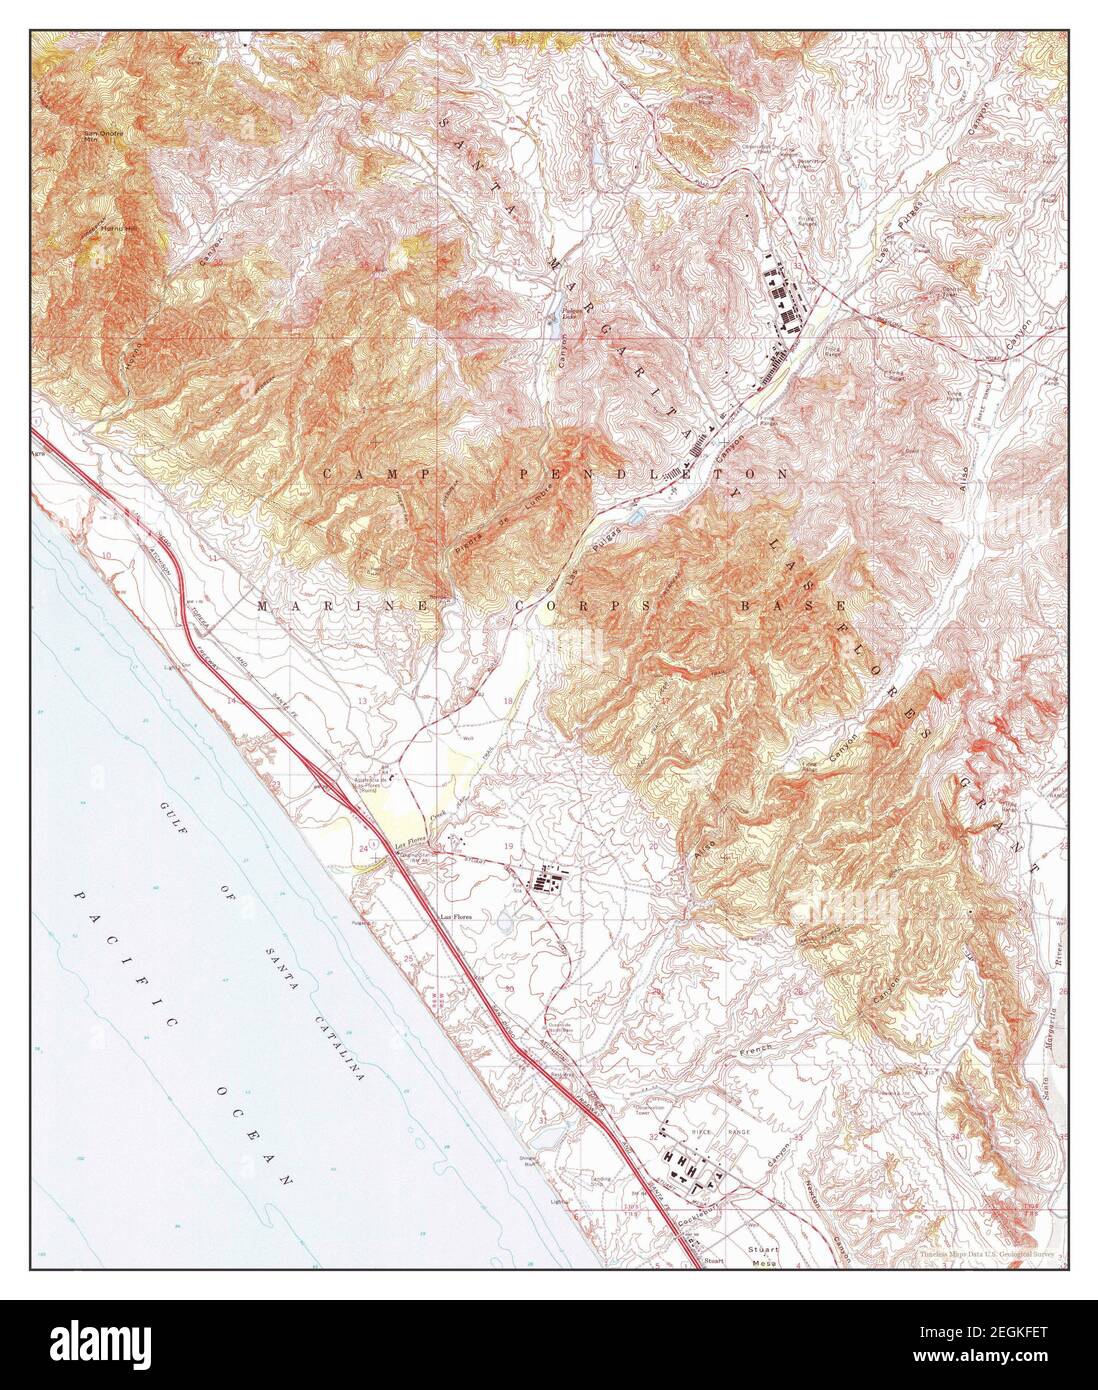 Las Pulgas Canyon, California, map 1968, 1:24000, United States of America by Timeless Maps, data U.S. Geological Survey Stock Photo